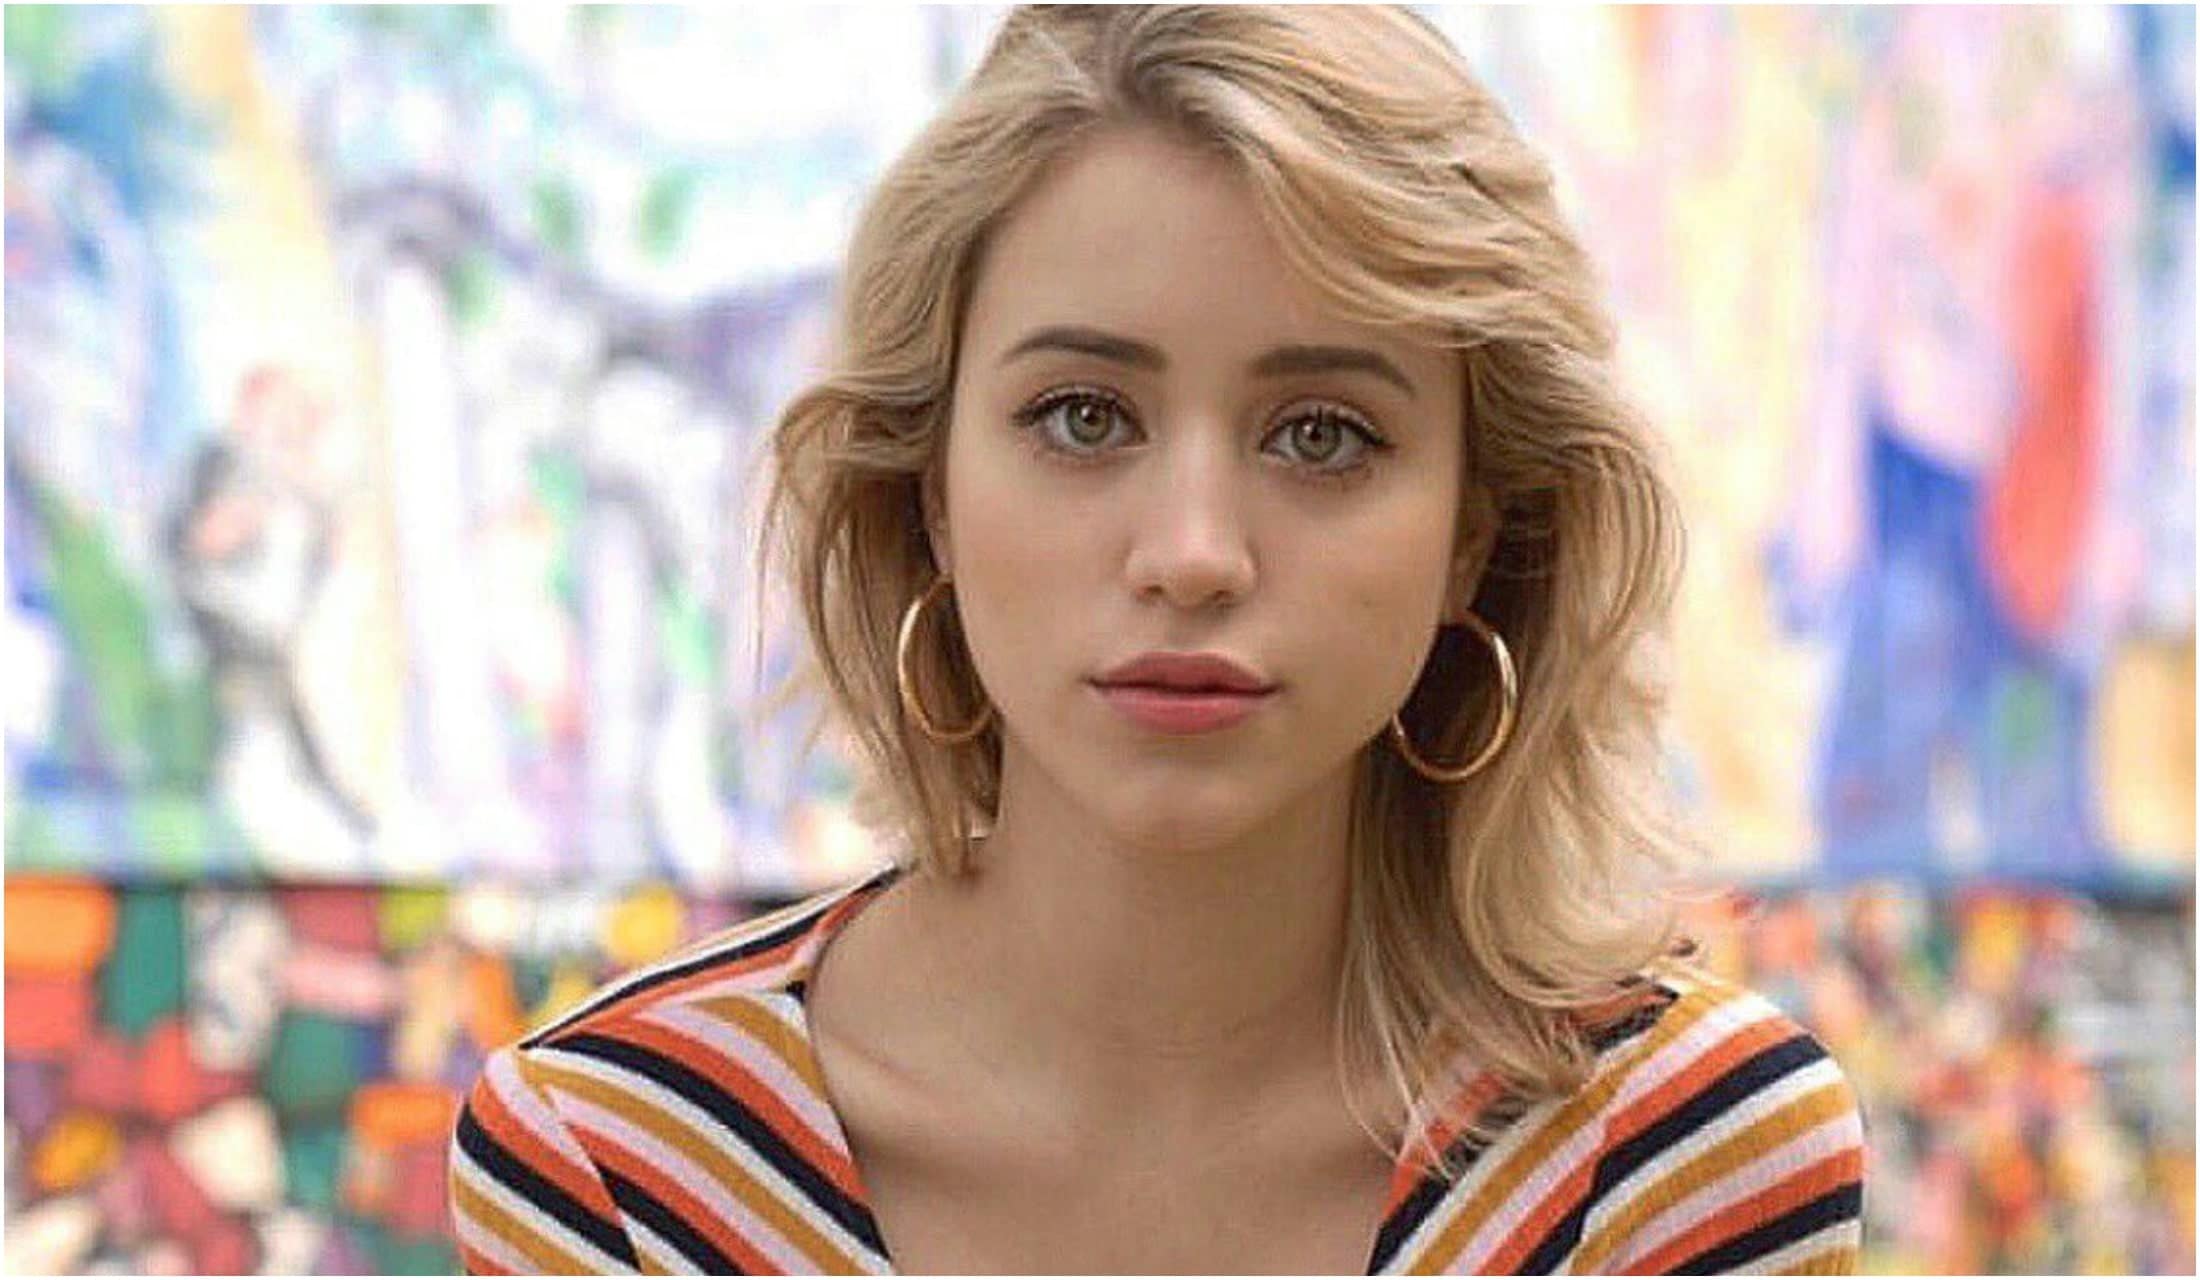 Caylee Cowan's biography: age, height, nationality, net worth